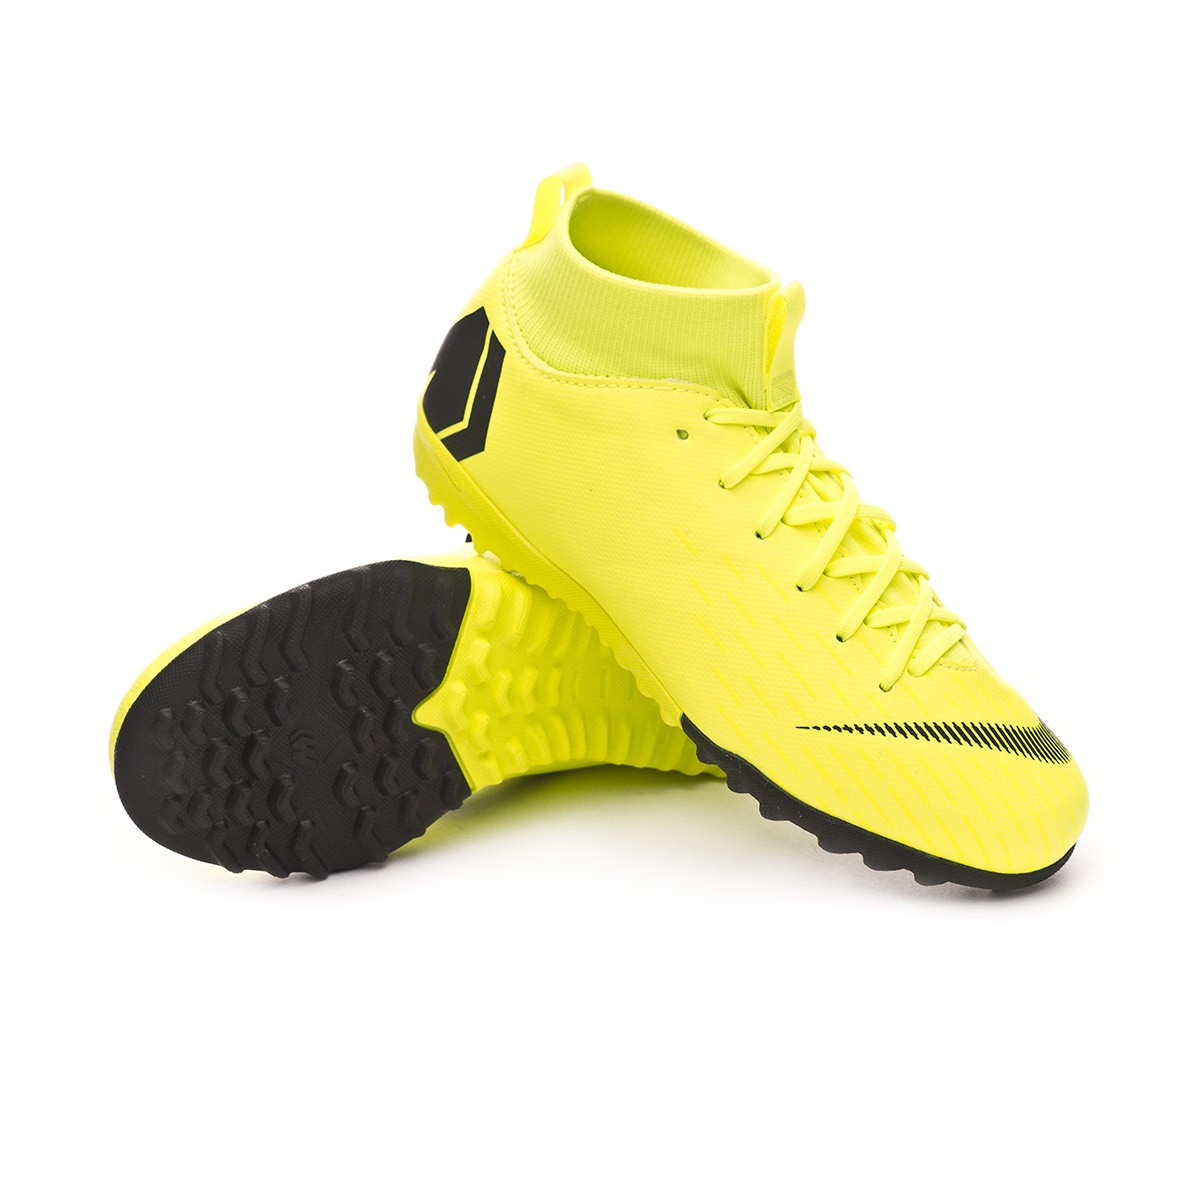 astro turf boots nike